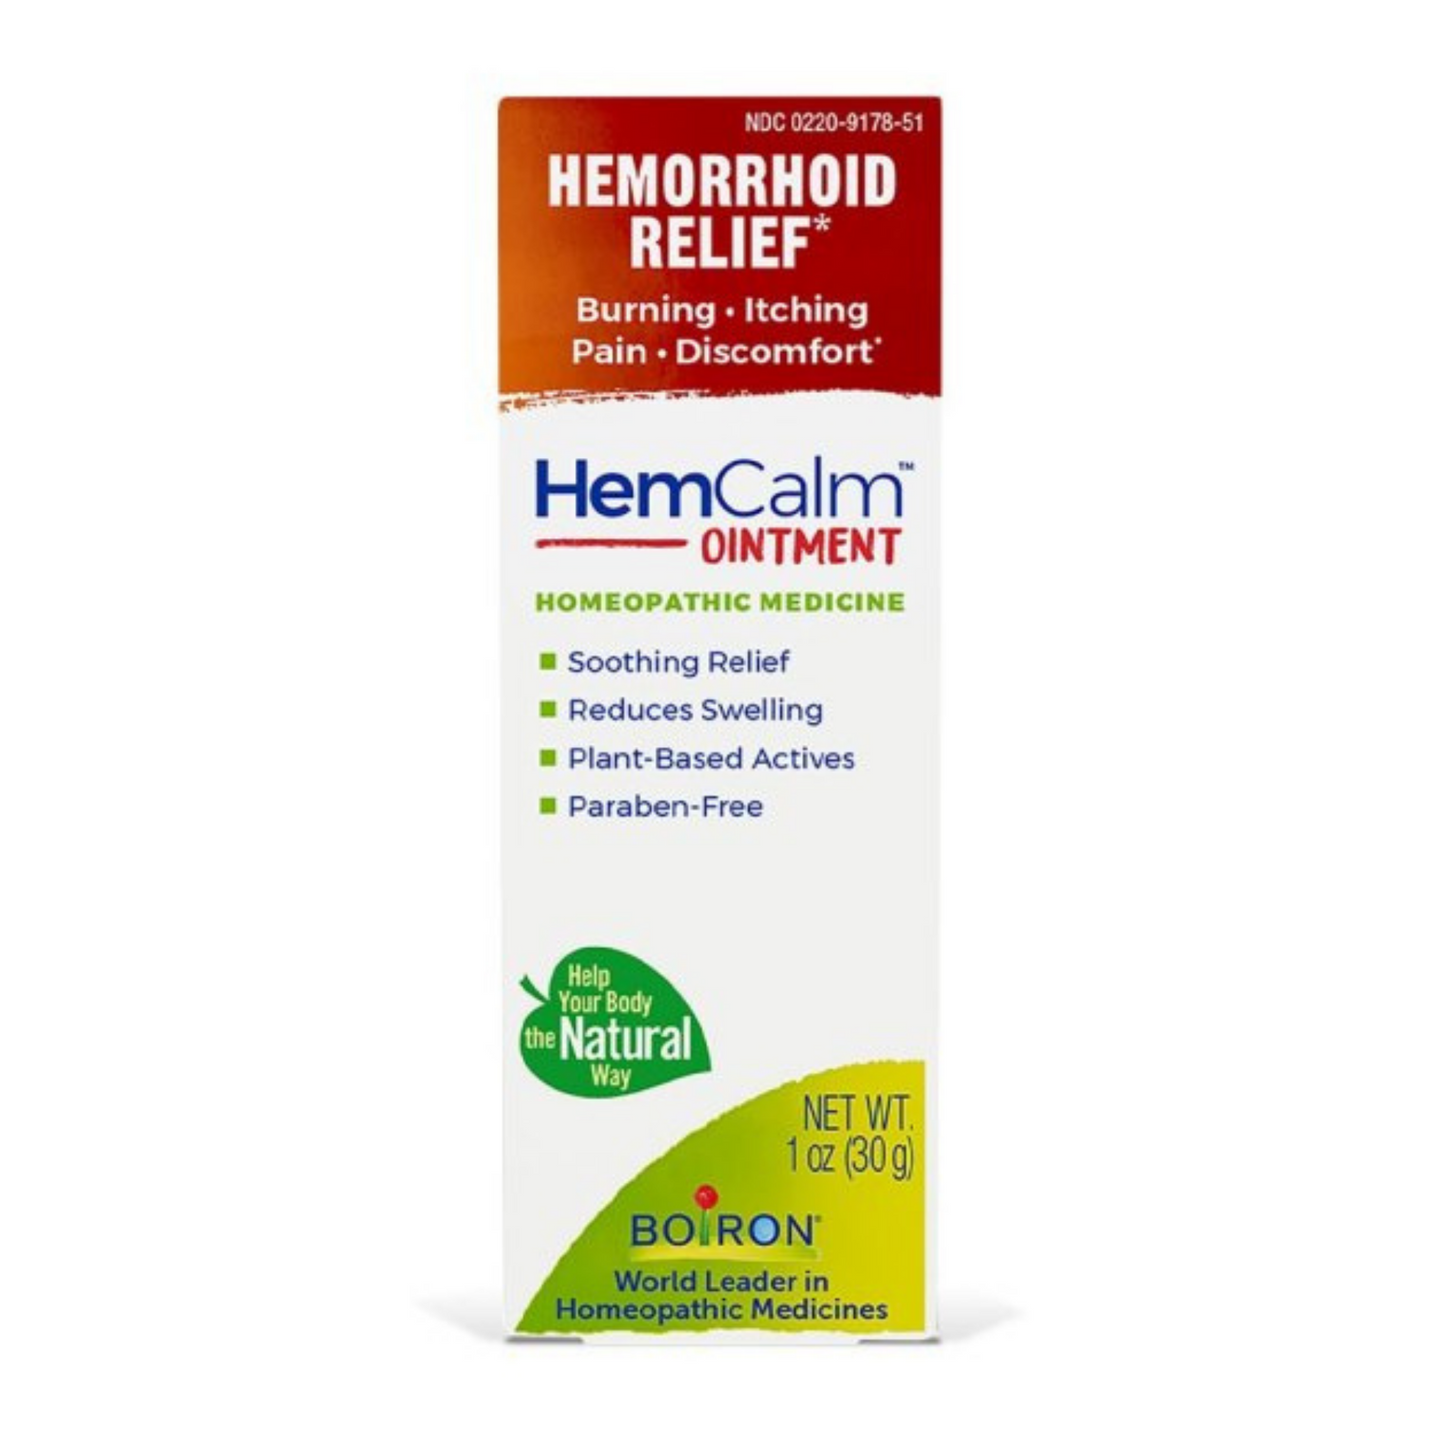 Primary image of HemCalm Ointment